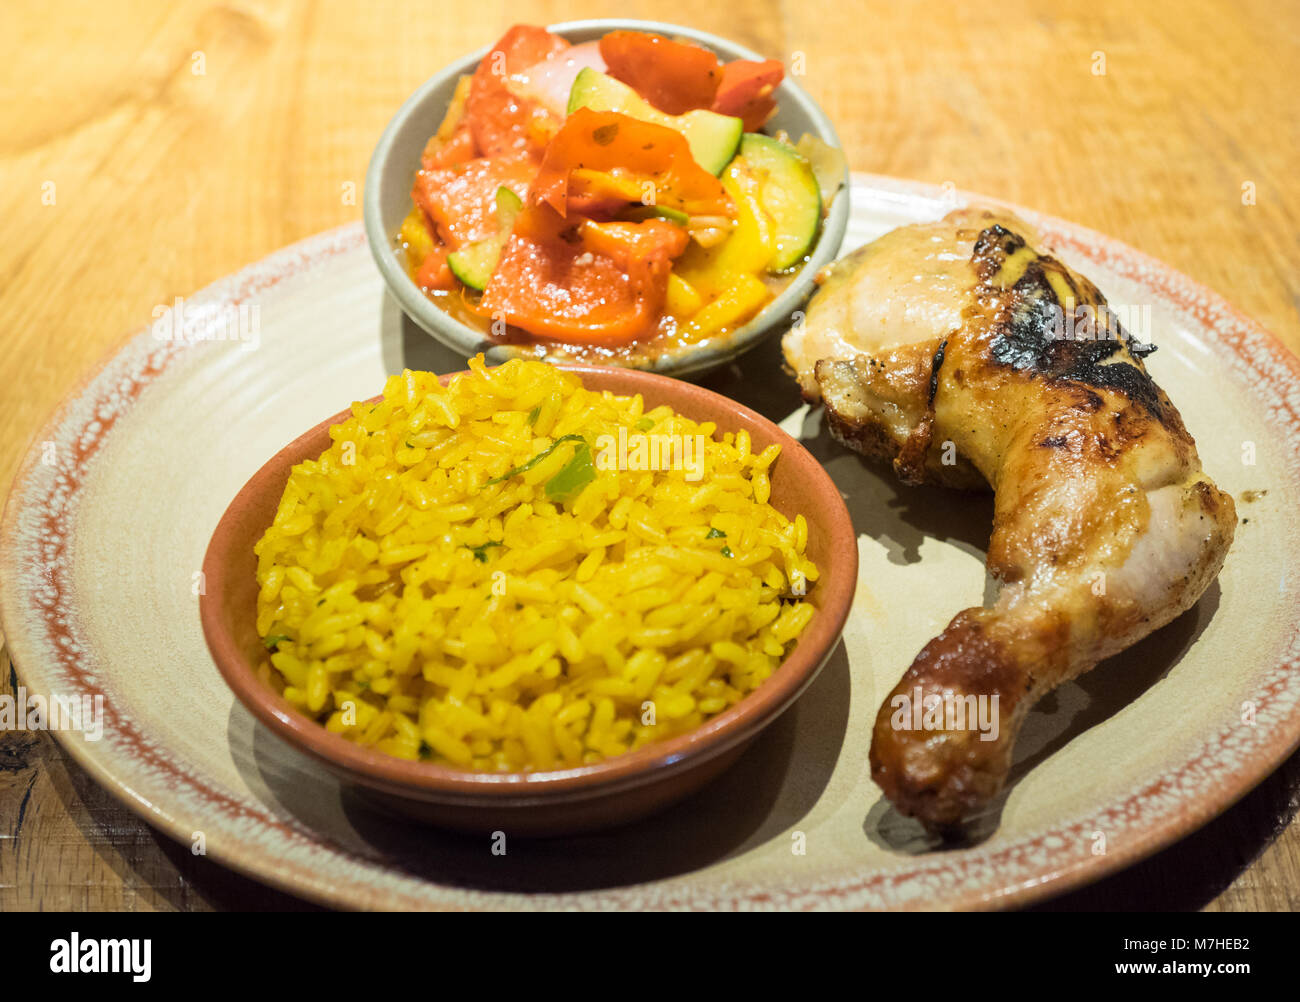 Peri-peri quarter chicken with sides of spiced rice and peri-peri vegetables from Nando's, a casual dining chain that originates from South Africa. Stock Photo